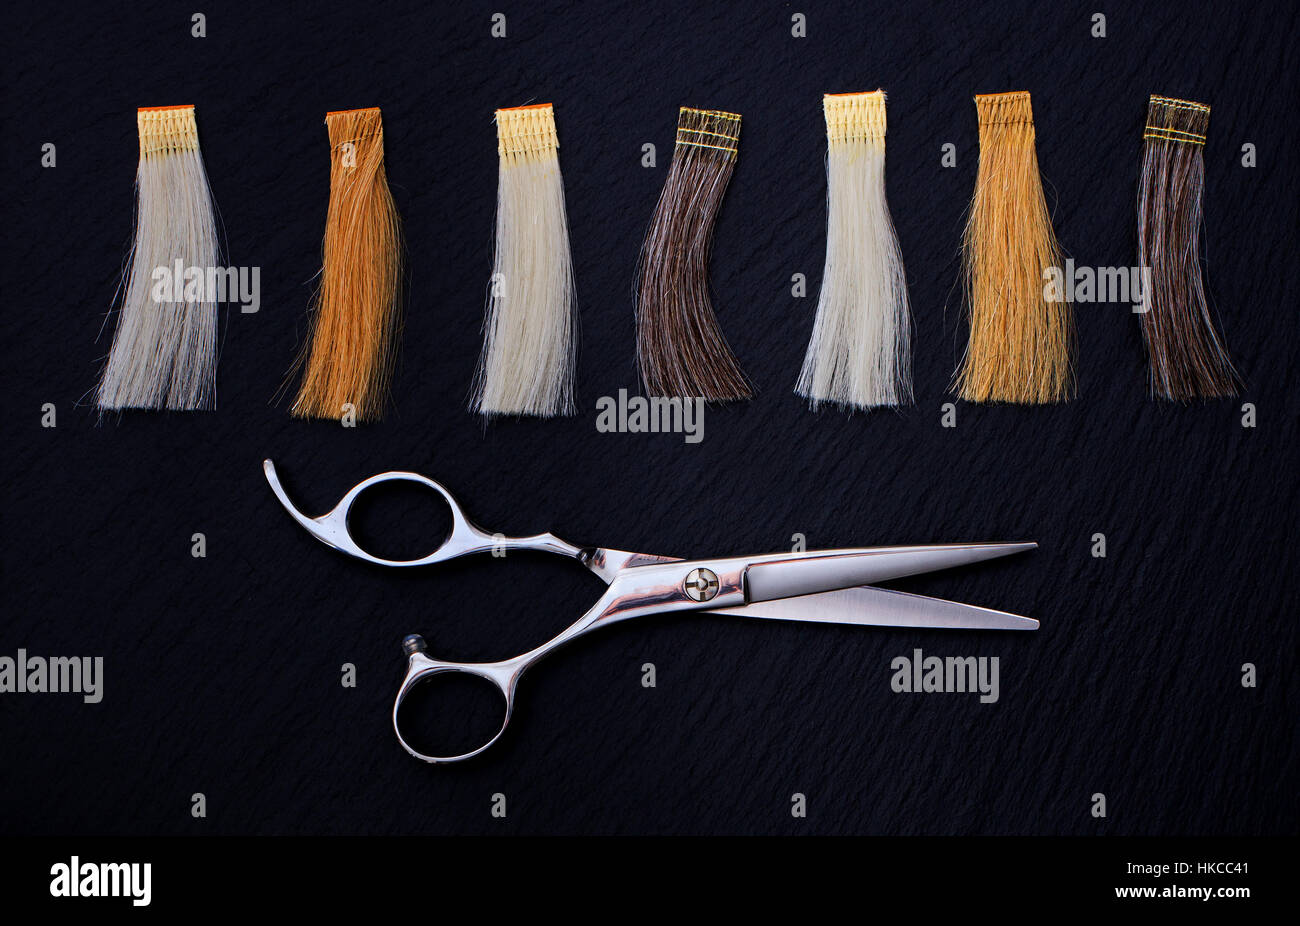 Hairdresser Accessories for coloring hair and Extensions colors on a black background. Scissors and hair samples Stock Photo